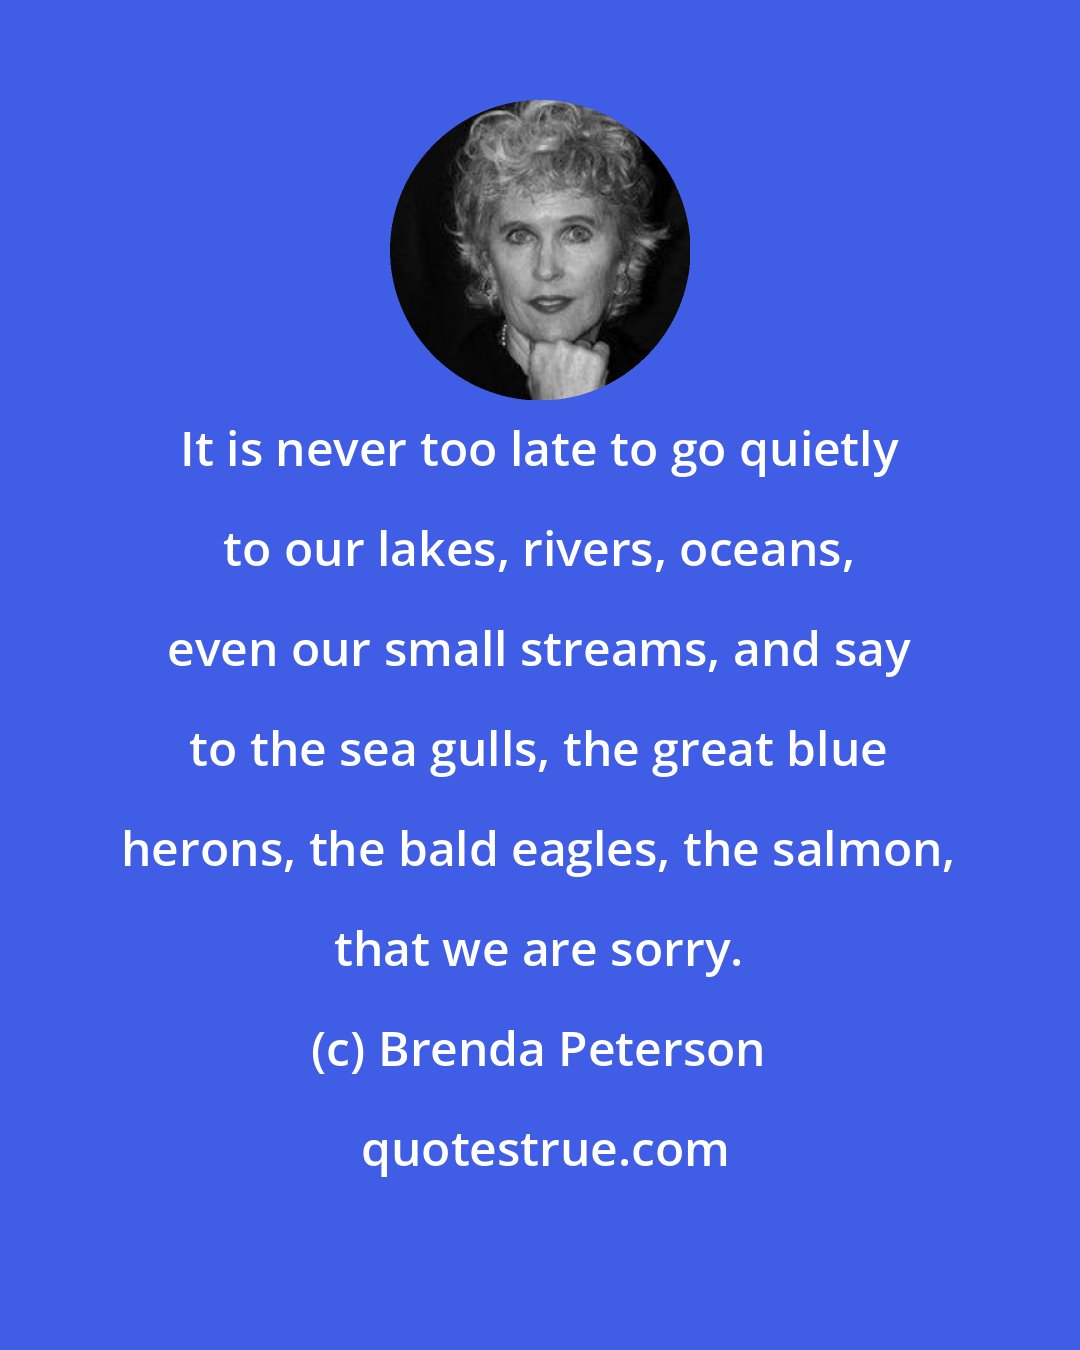 Brenda Peterson: It is never too late to go quietly to our lakes, rivers, oceans, even our small streams, and say to the sea gulls, the great blue herons, the bald eagles, the salmon, that we are sorry.